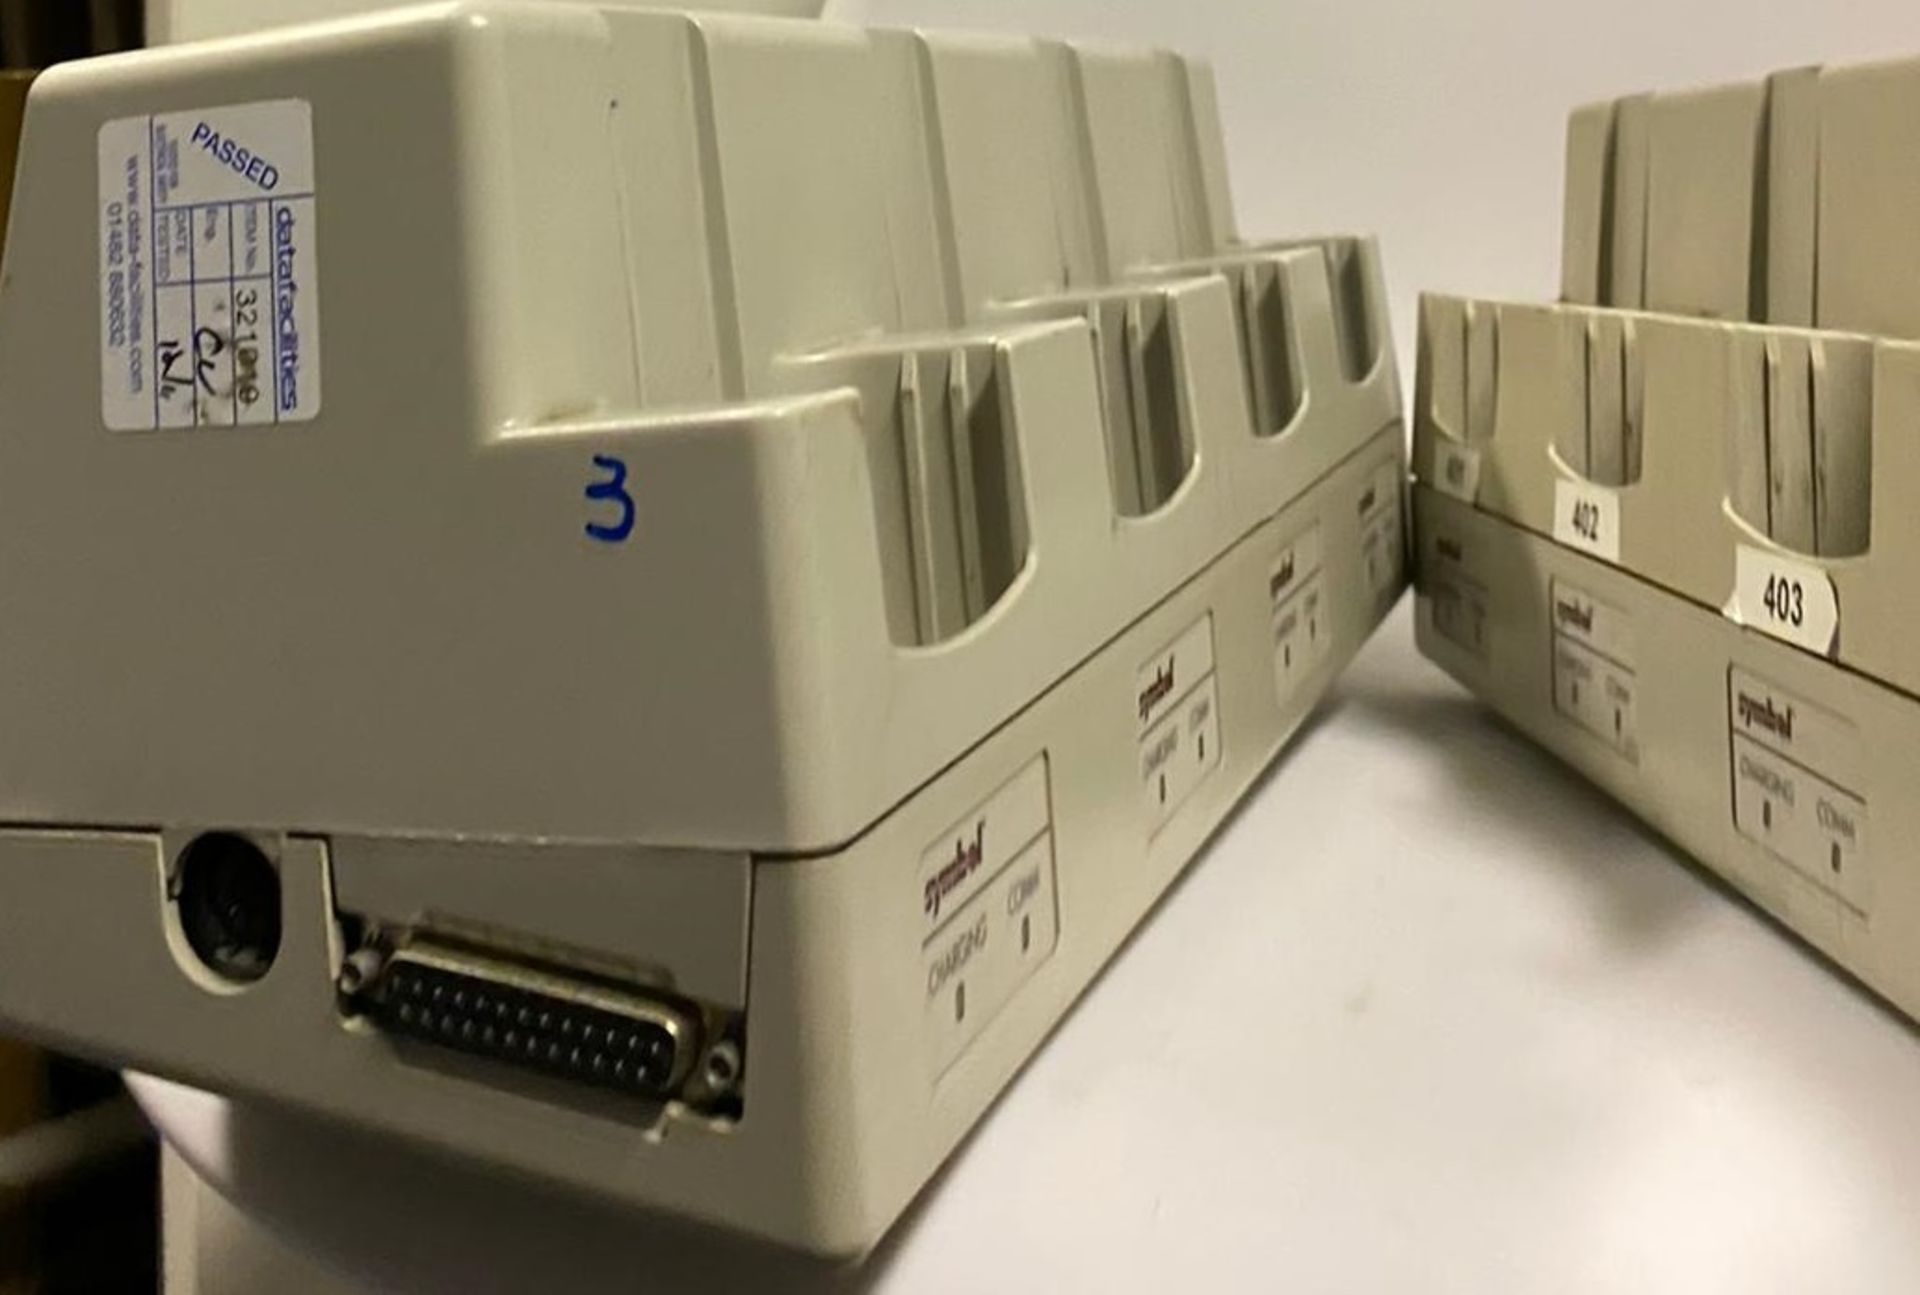 2 x Symbol Quad Slot Charging Cradles for PDT 3100 - Used Condition - Location: Altrincham WA14 - - Image 6 of 7